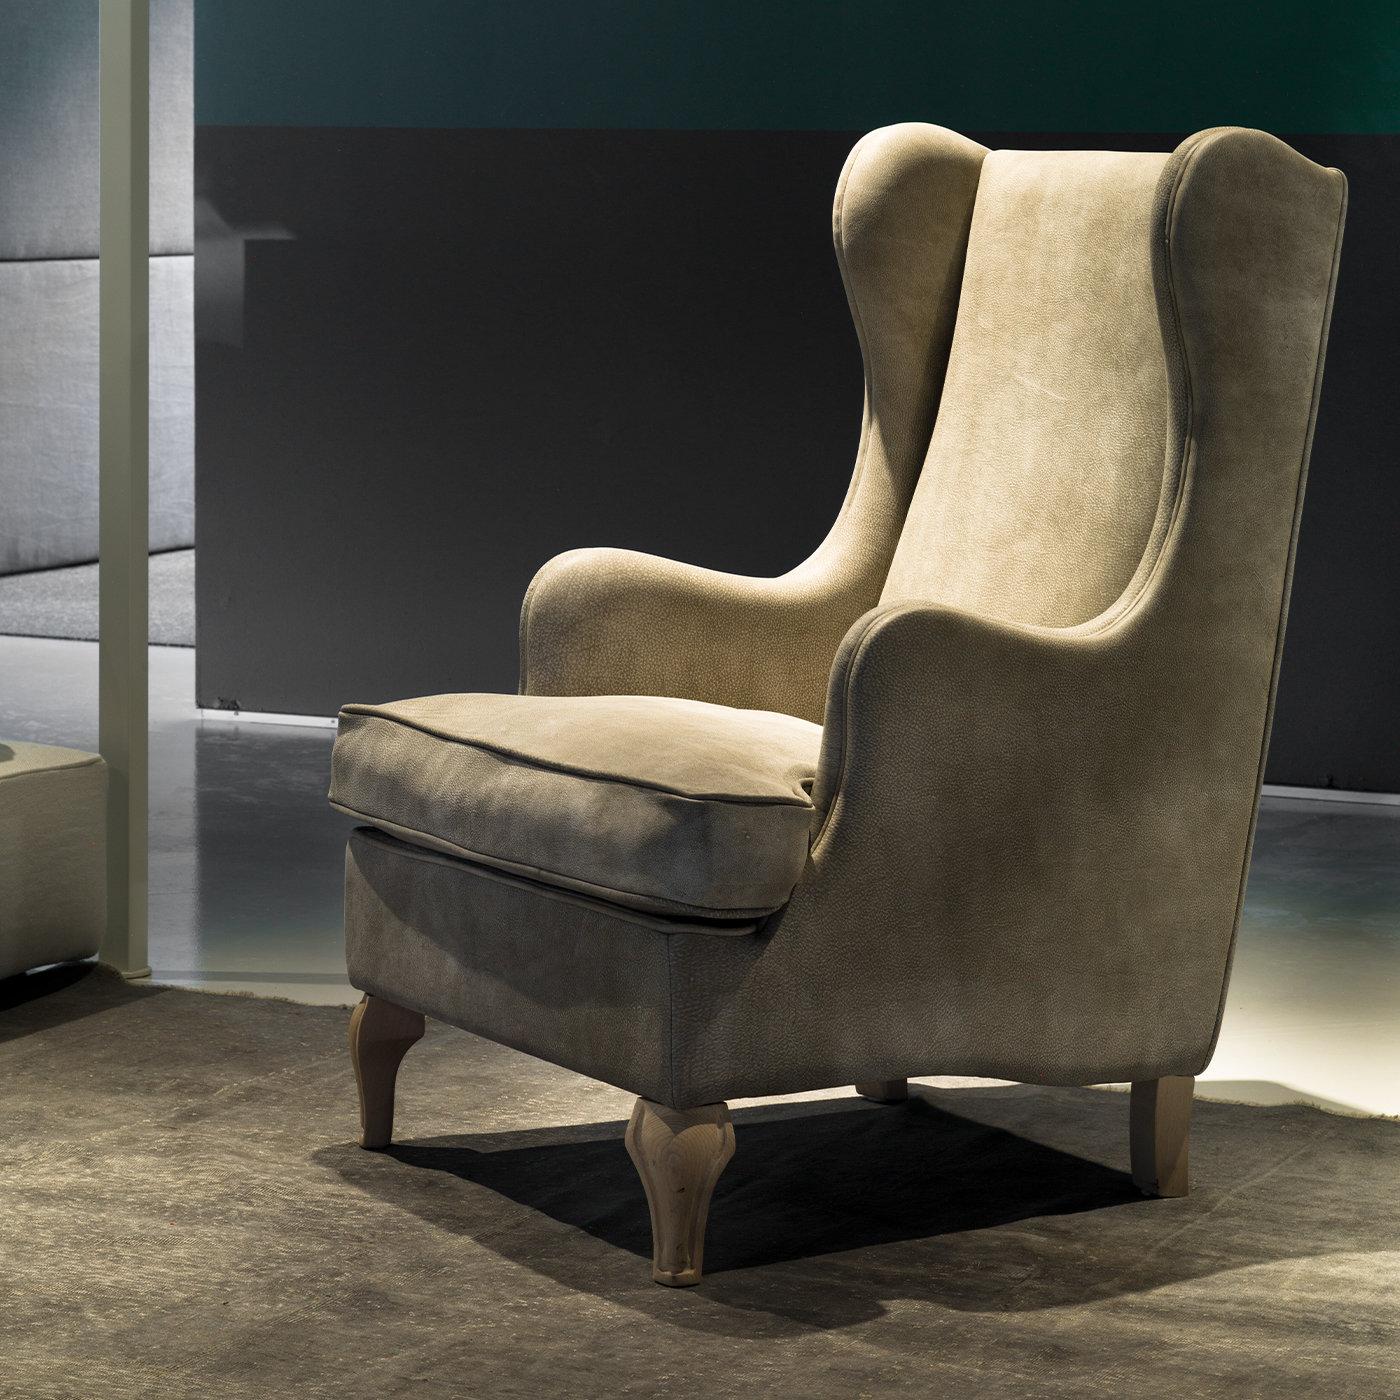 Stately yet harmonious, this luxe armchair padded with lined polyurethane will infuse bold character into rustic-chic decors. The fluffy seat - equipped with suspension steel springs and stuffed with warm feathers - flanked by sinuous armrests